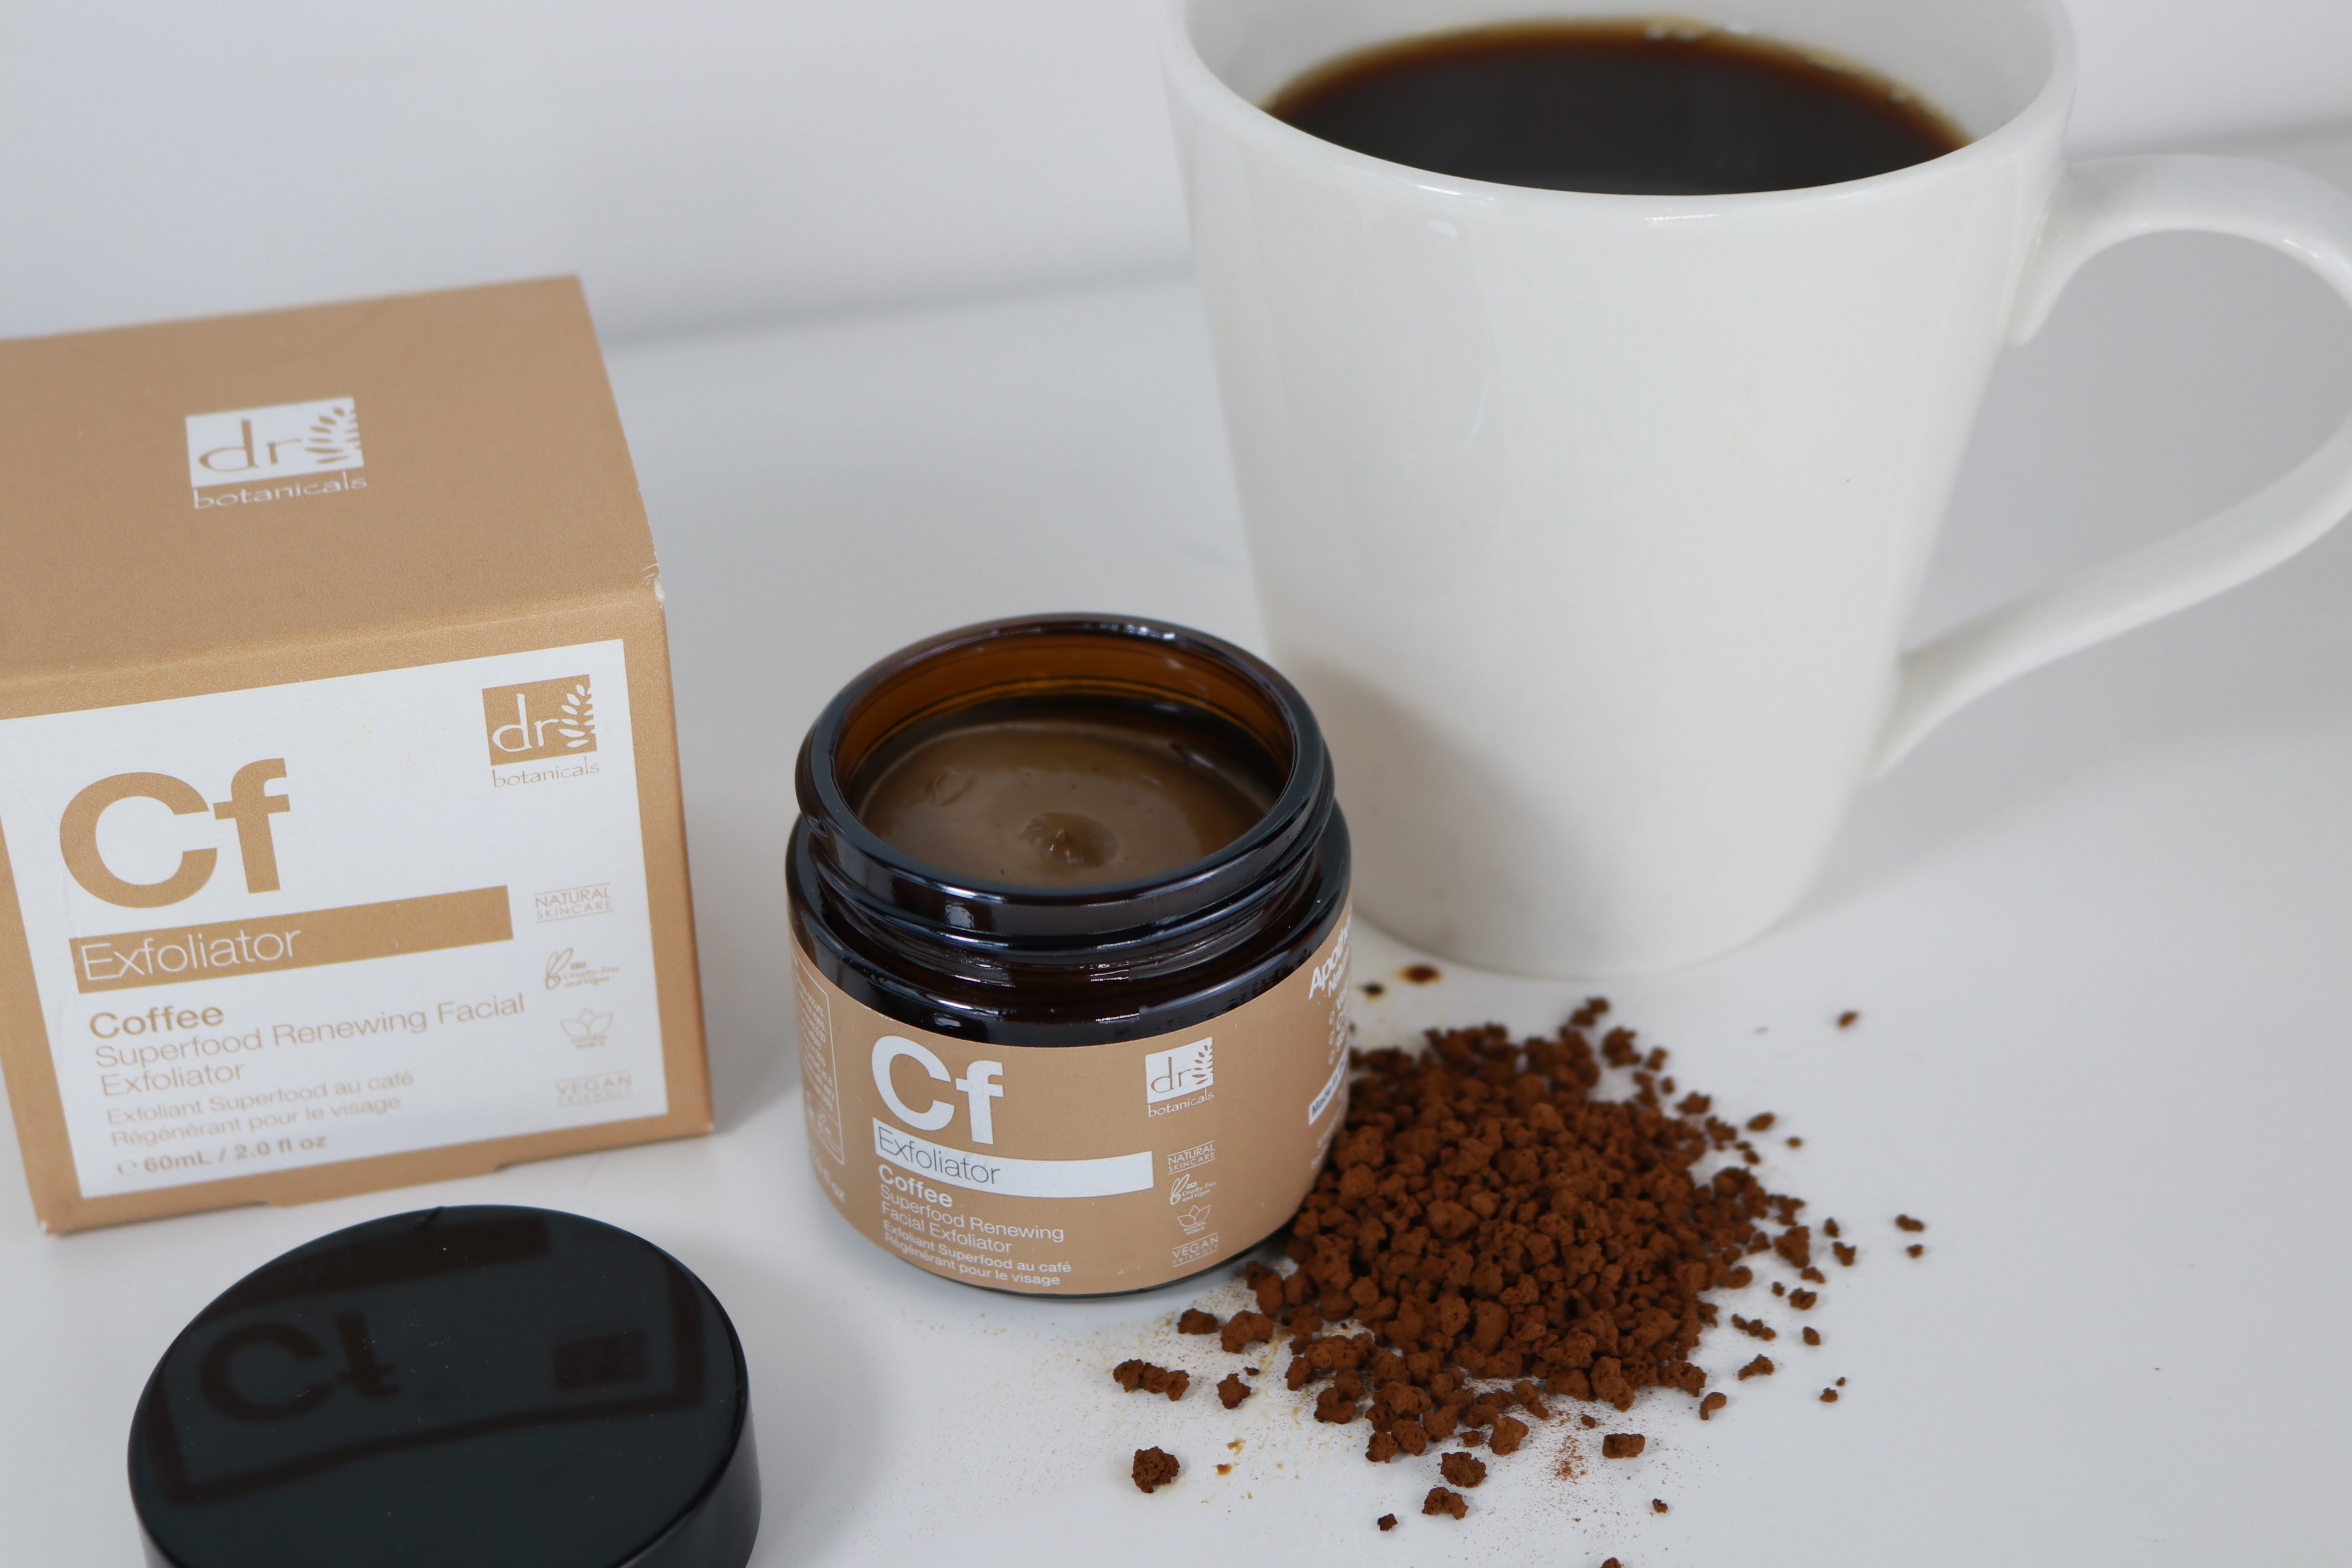 The benefits of coffee for your skin